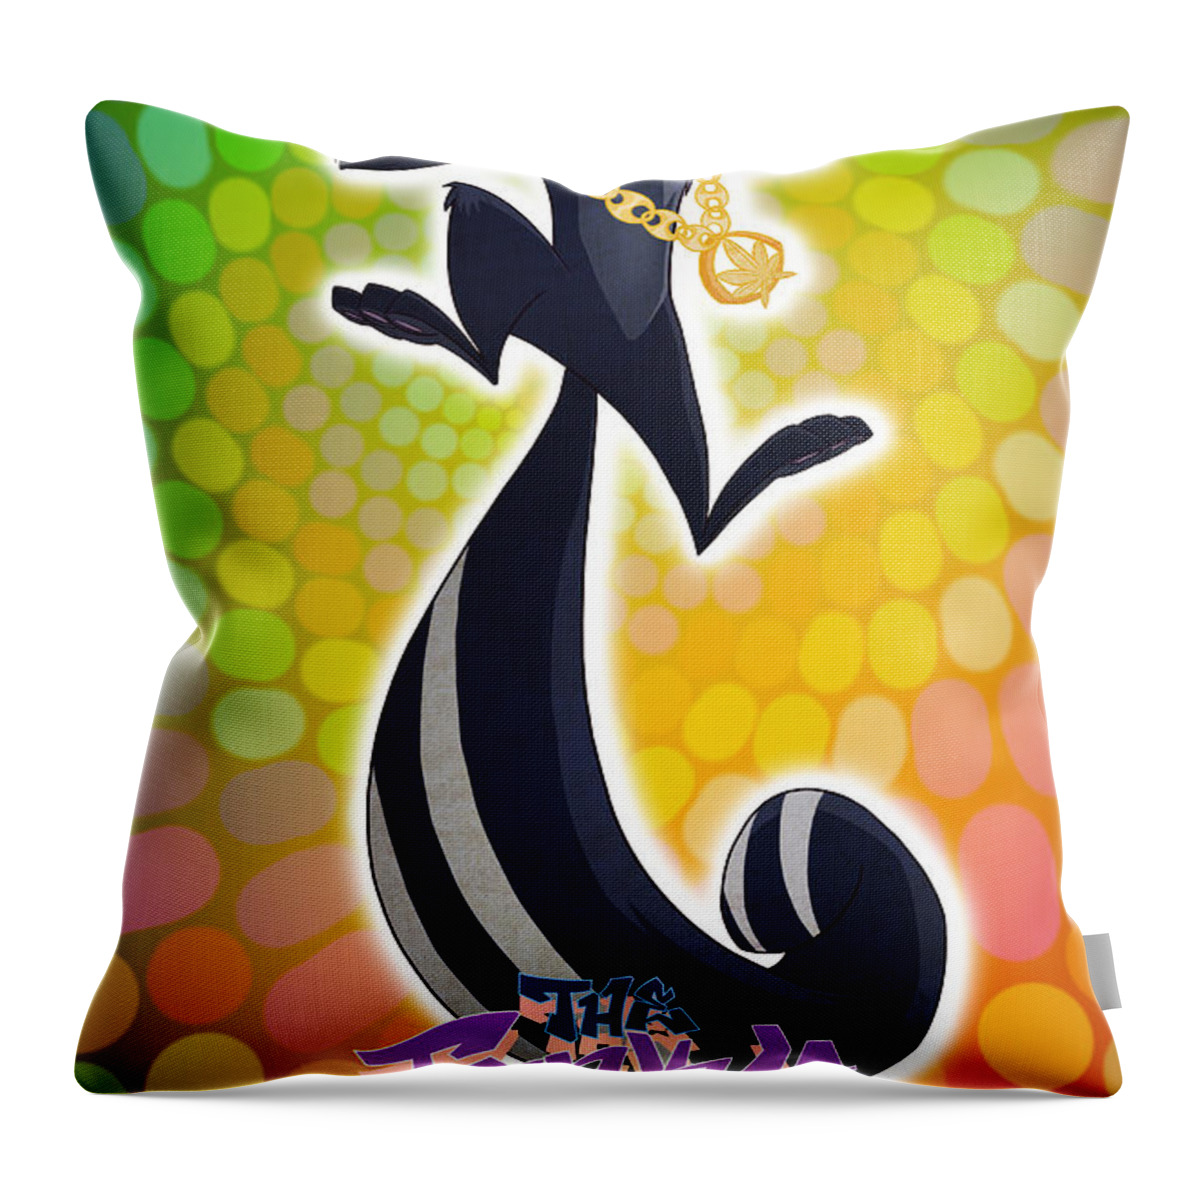 Skunks Throw Pillow featuring the digital art Skunk Funk by Dedos